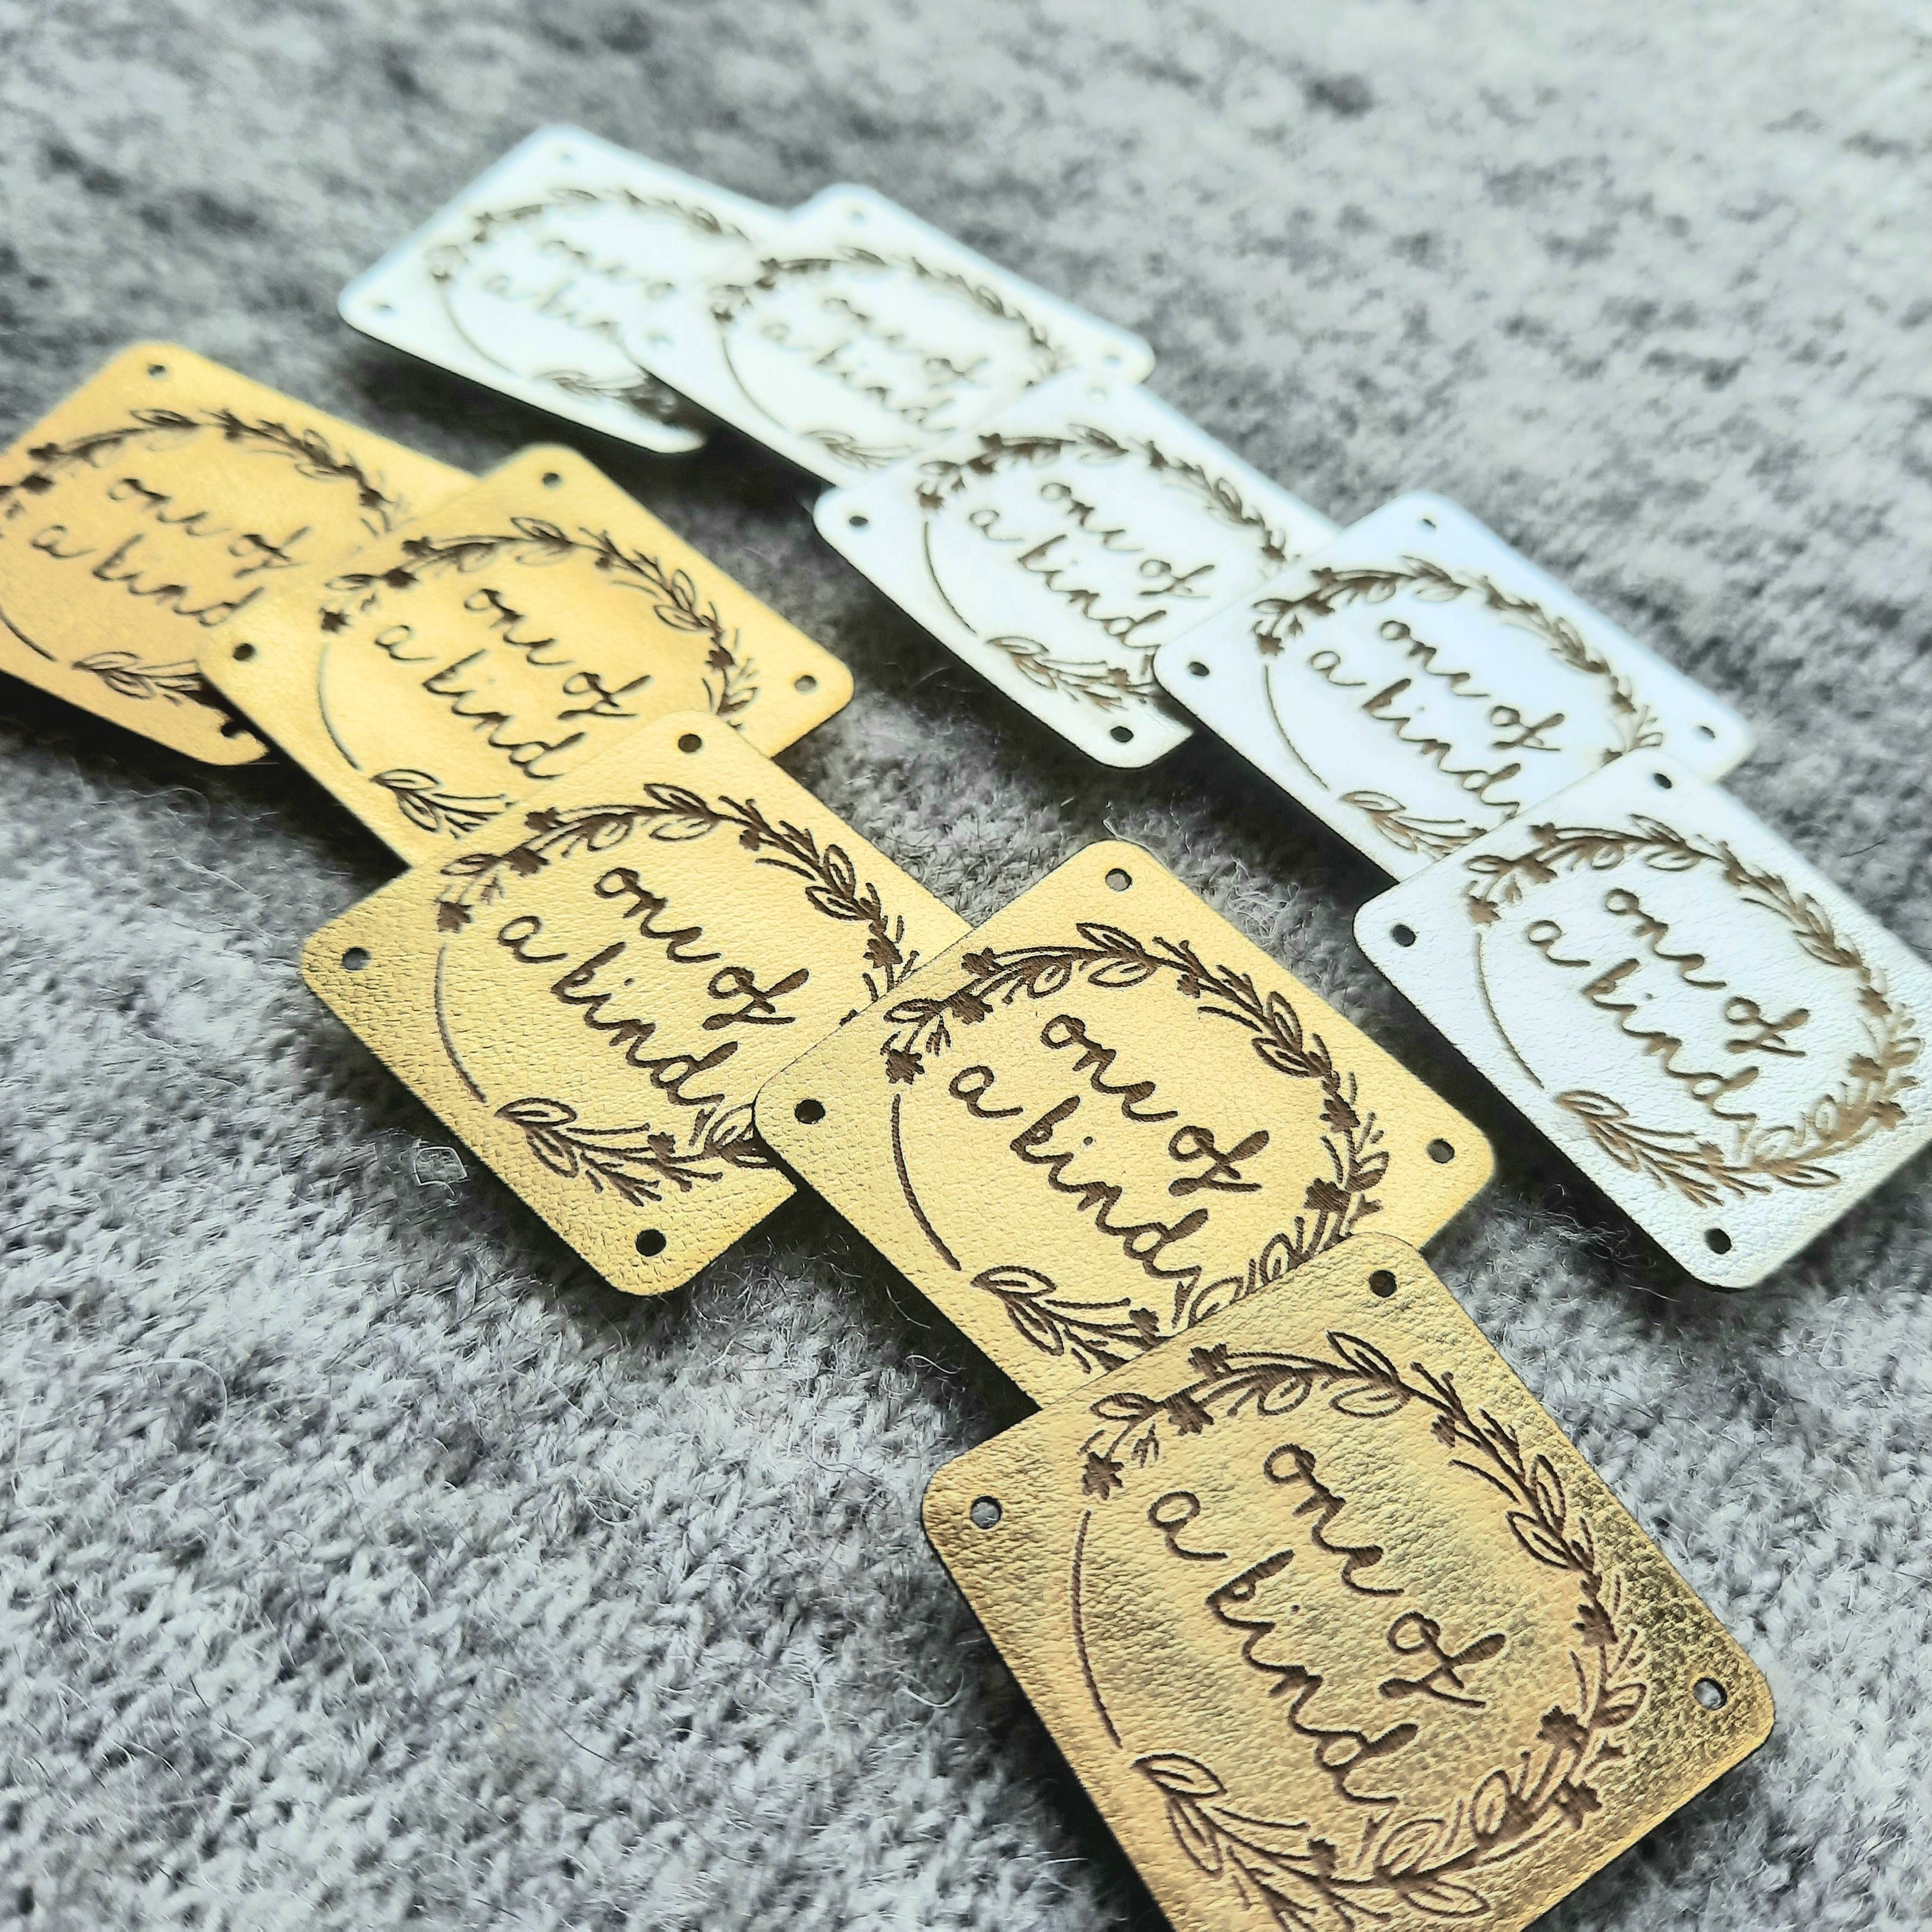 Tags, labels & craft supplies